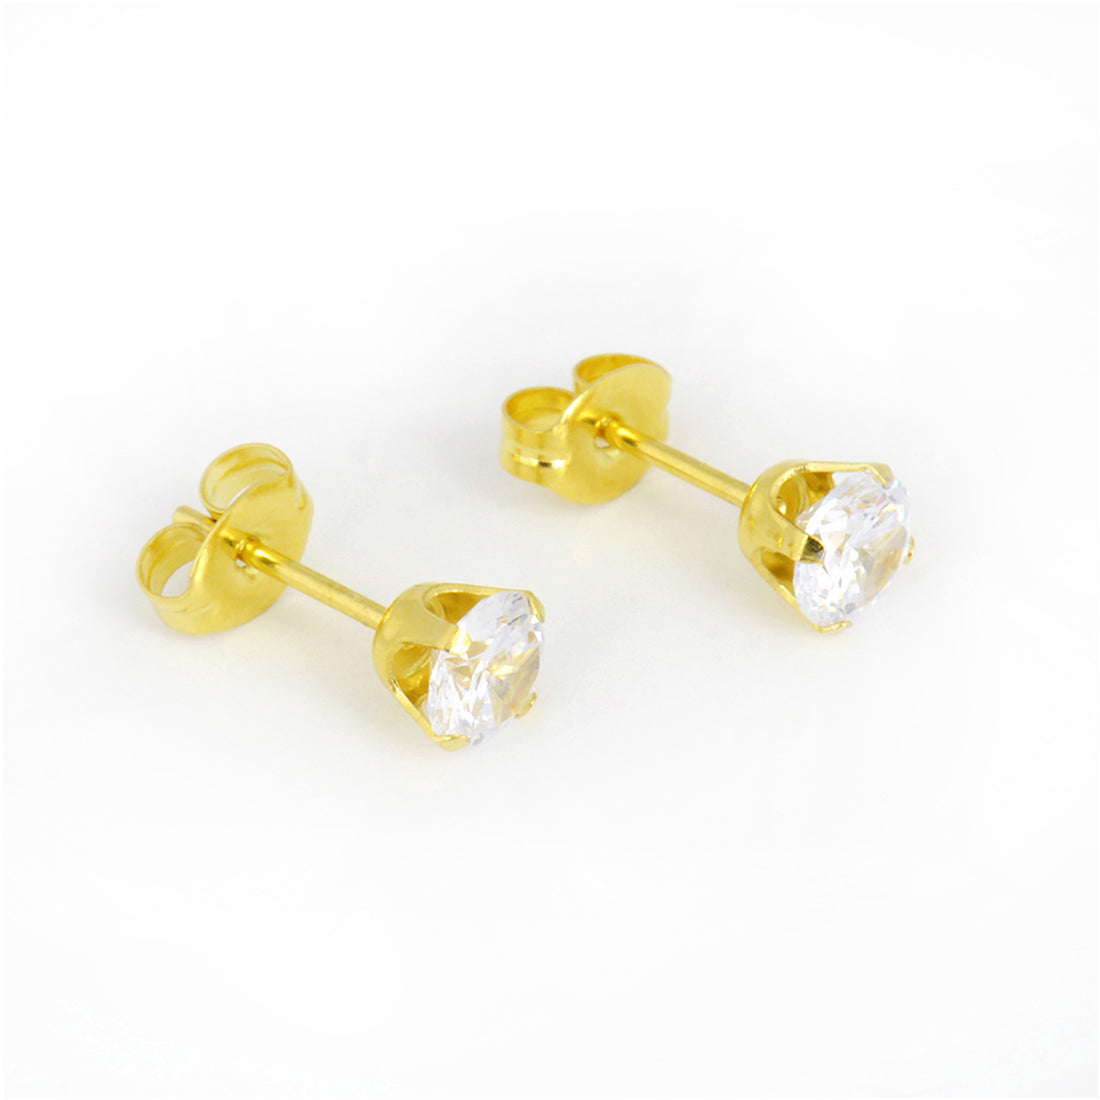 5MM Cubic Zirconia 24K Pure Gold Plated Ear Studs | Ideal for everyday wear